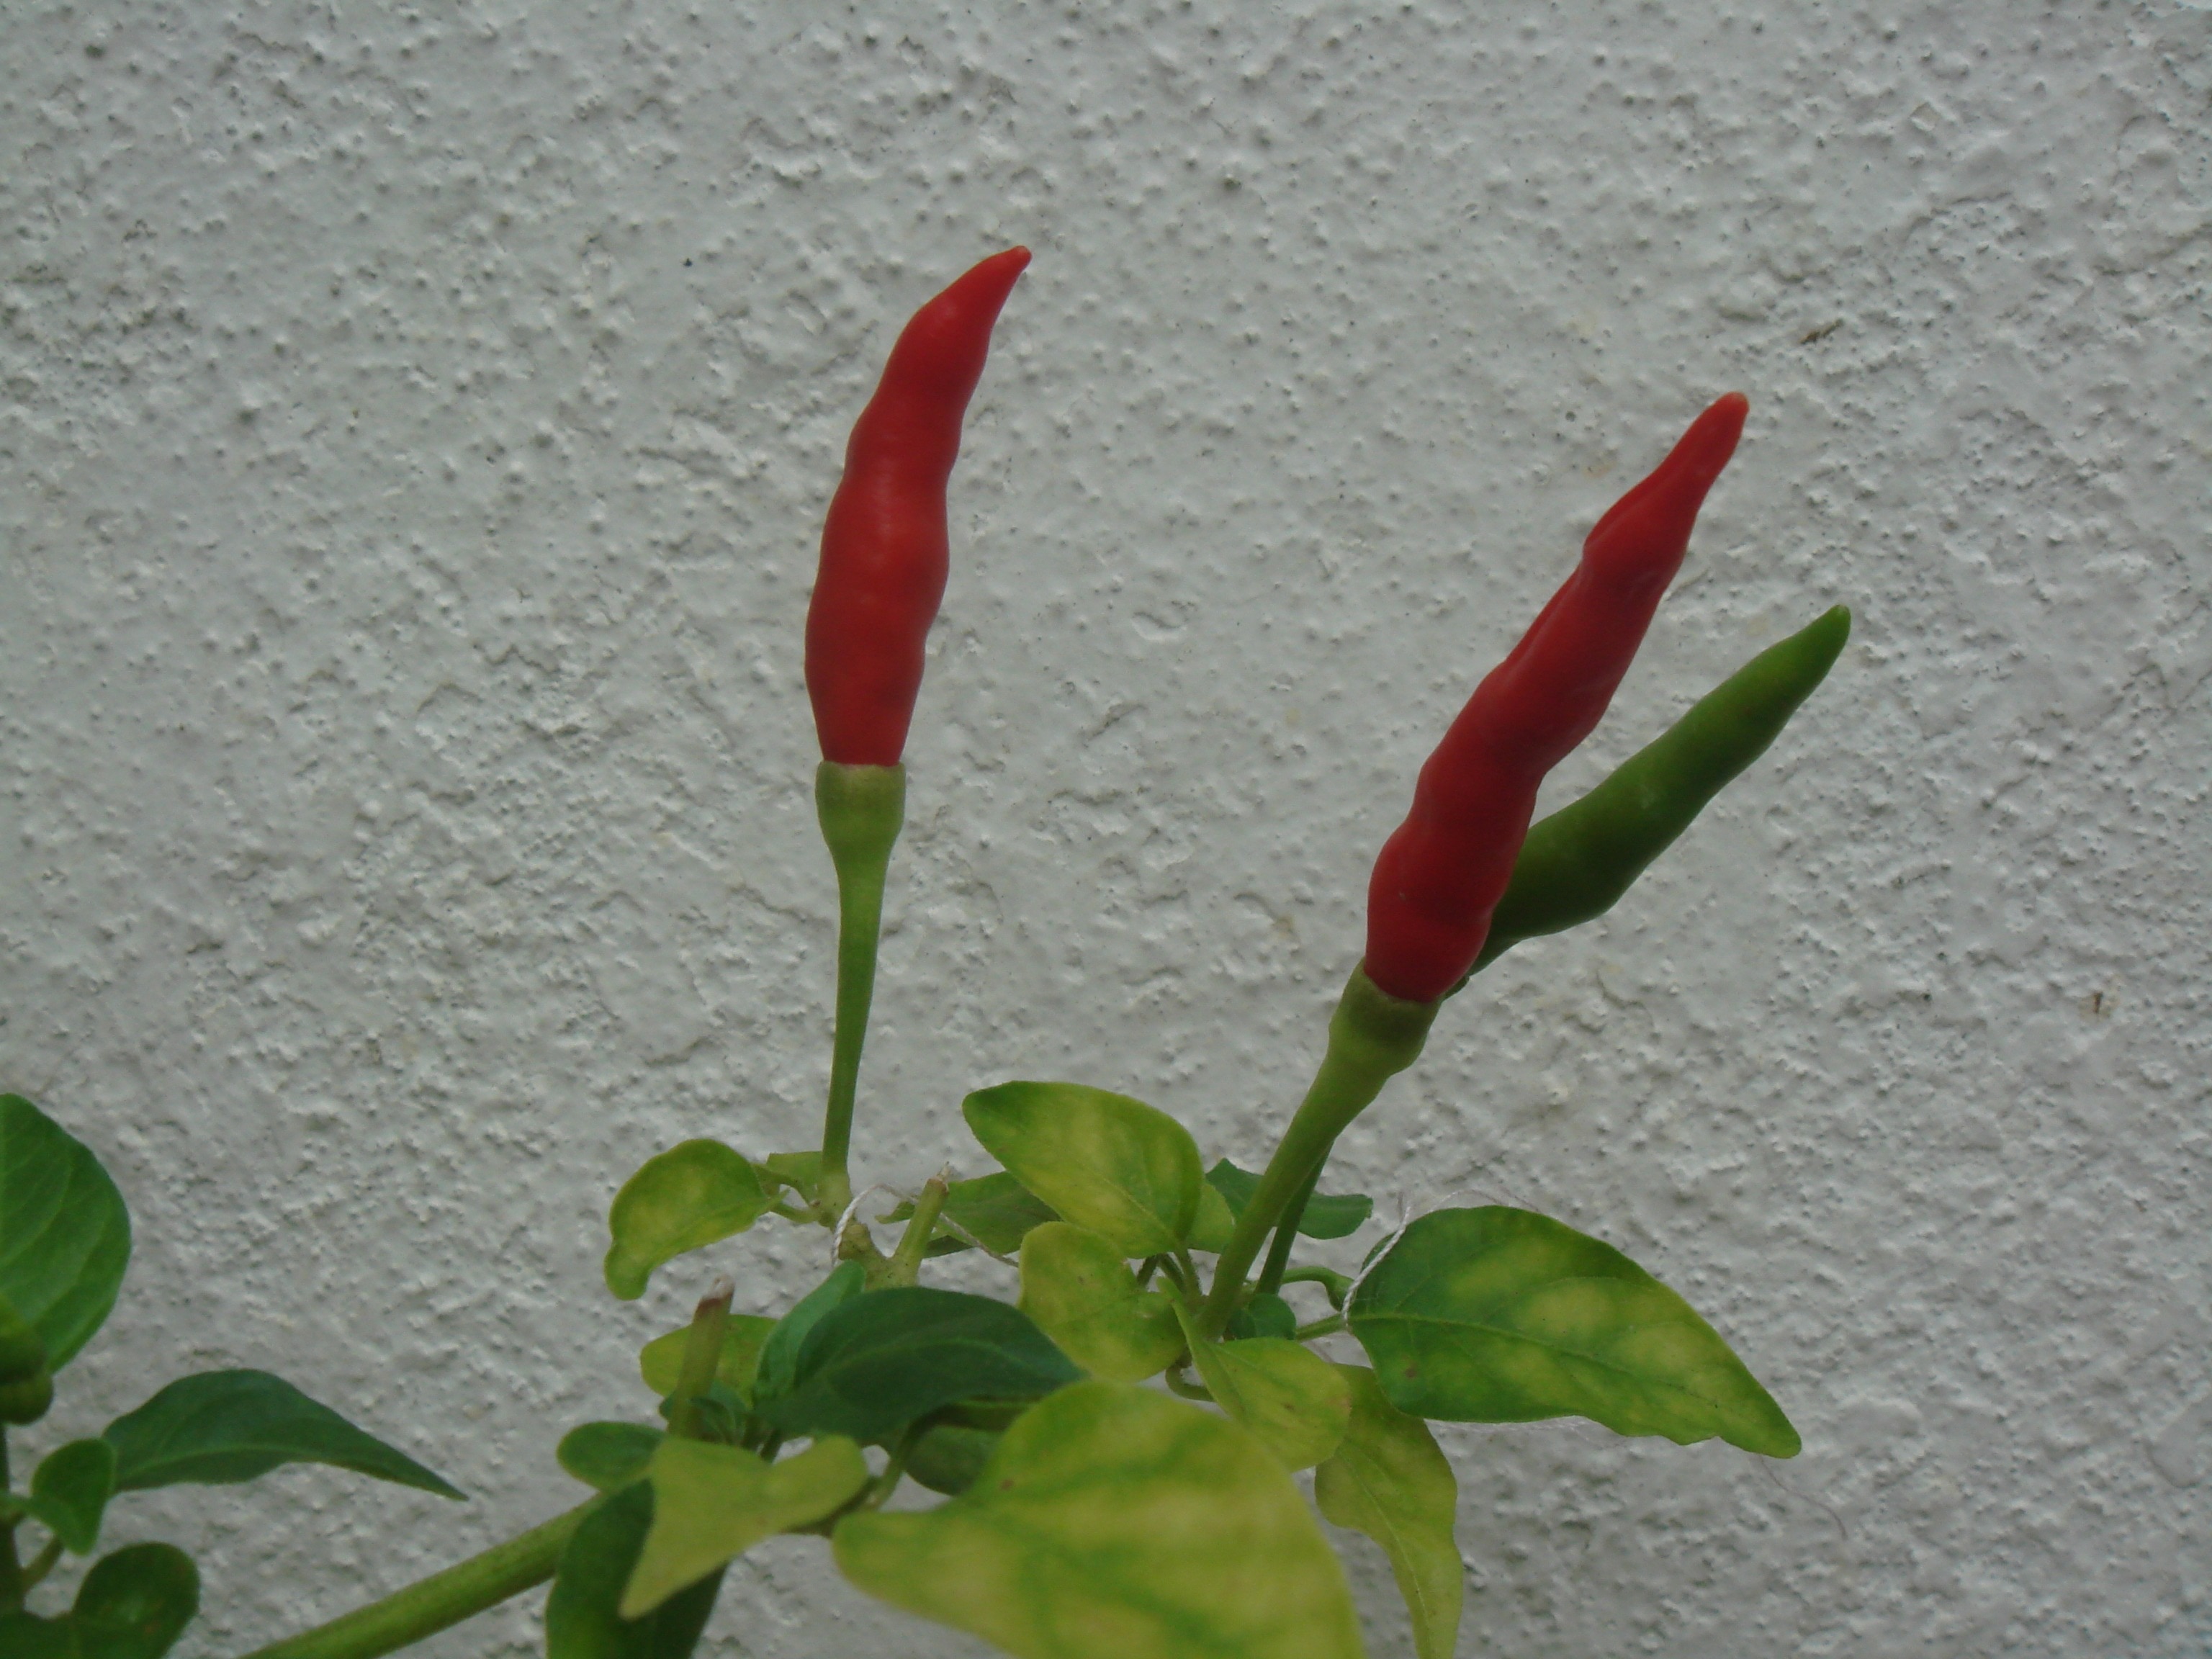 red and green chili pepper behind white wall paint